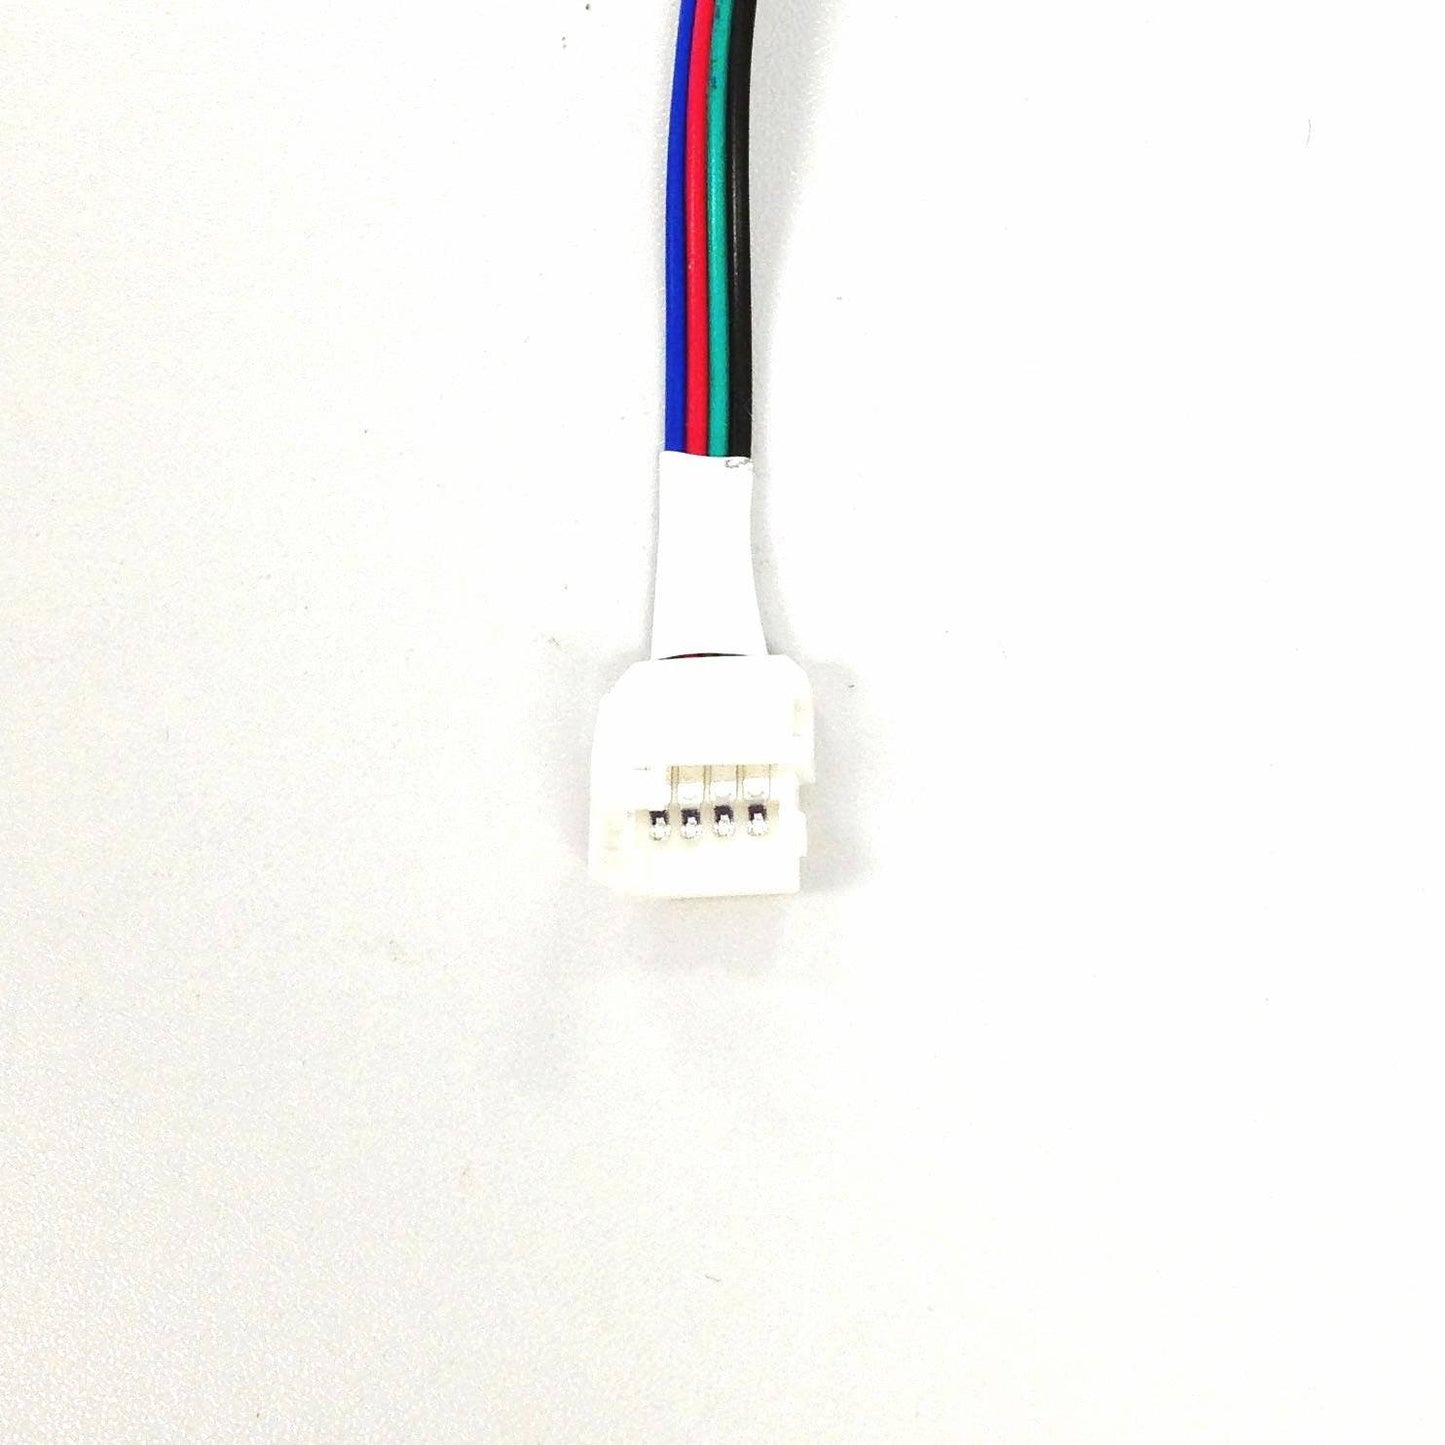 short rgb black green red blue wire with white open clip with metal connectors at end